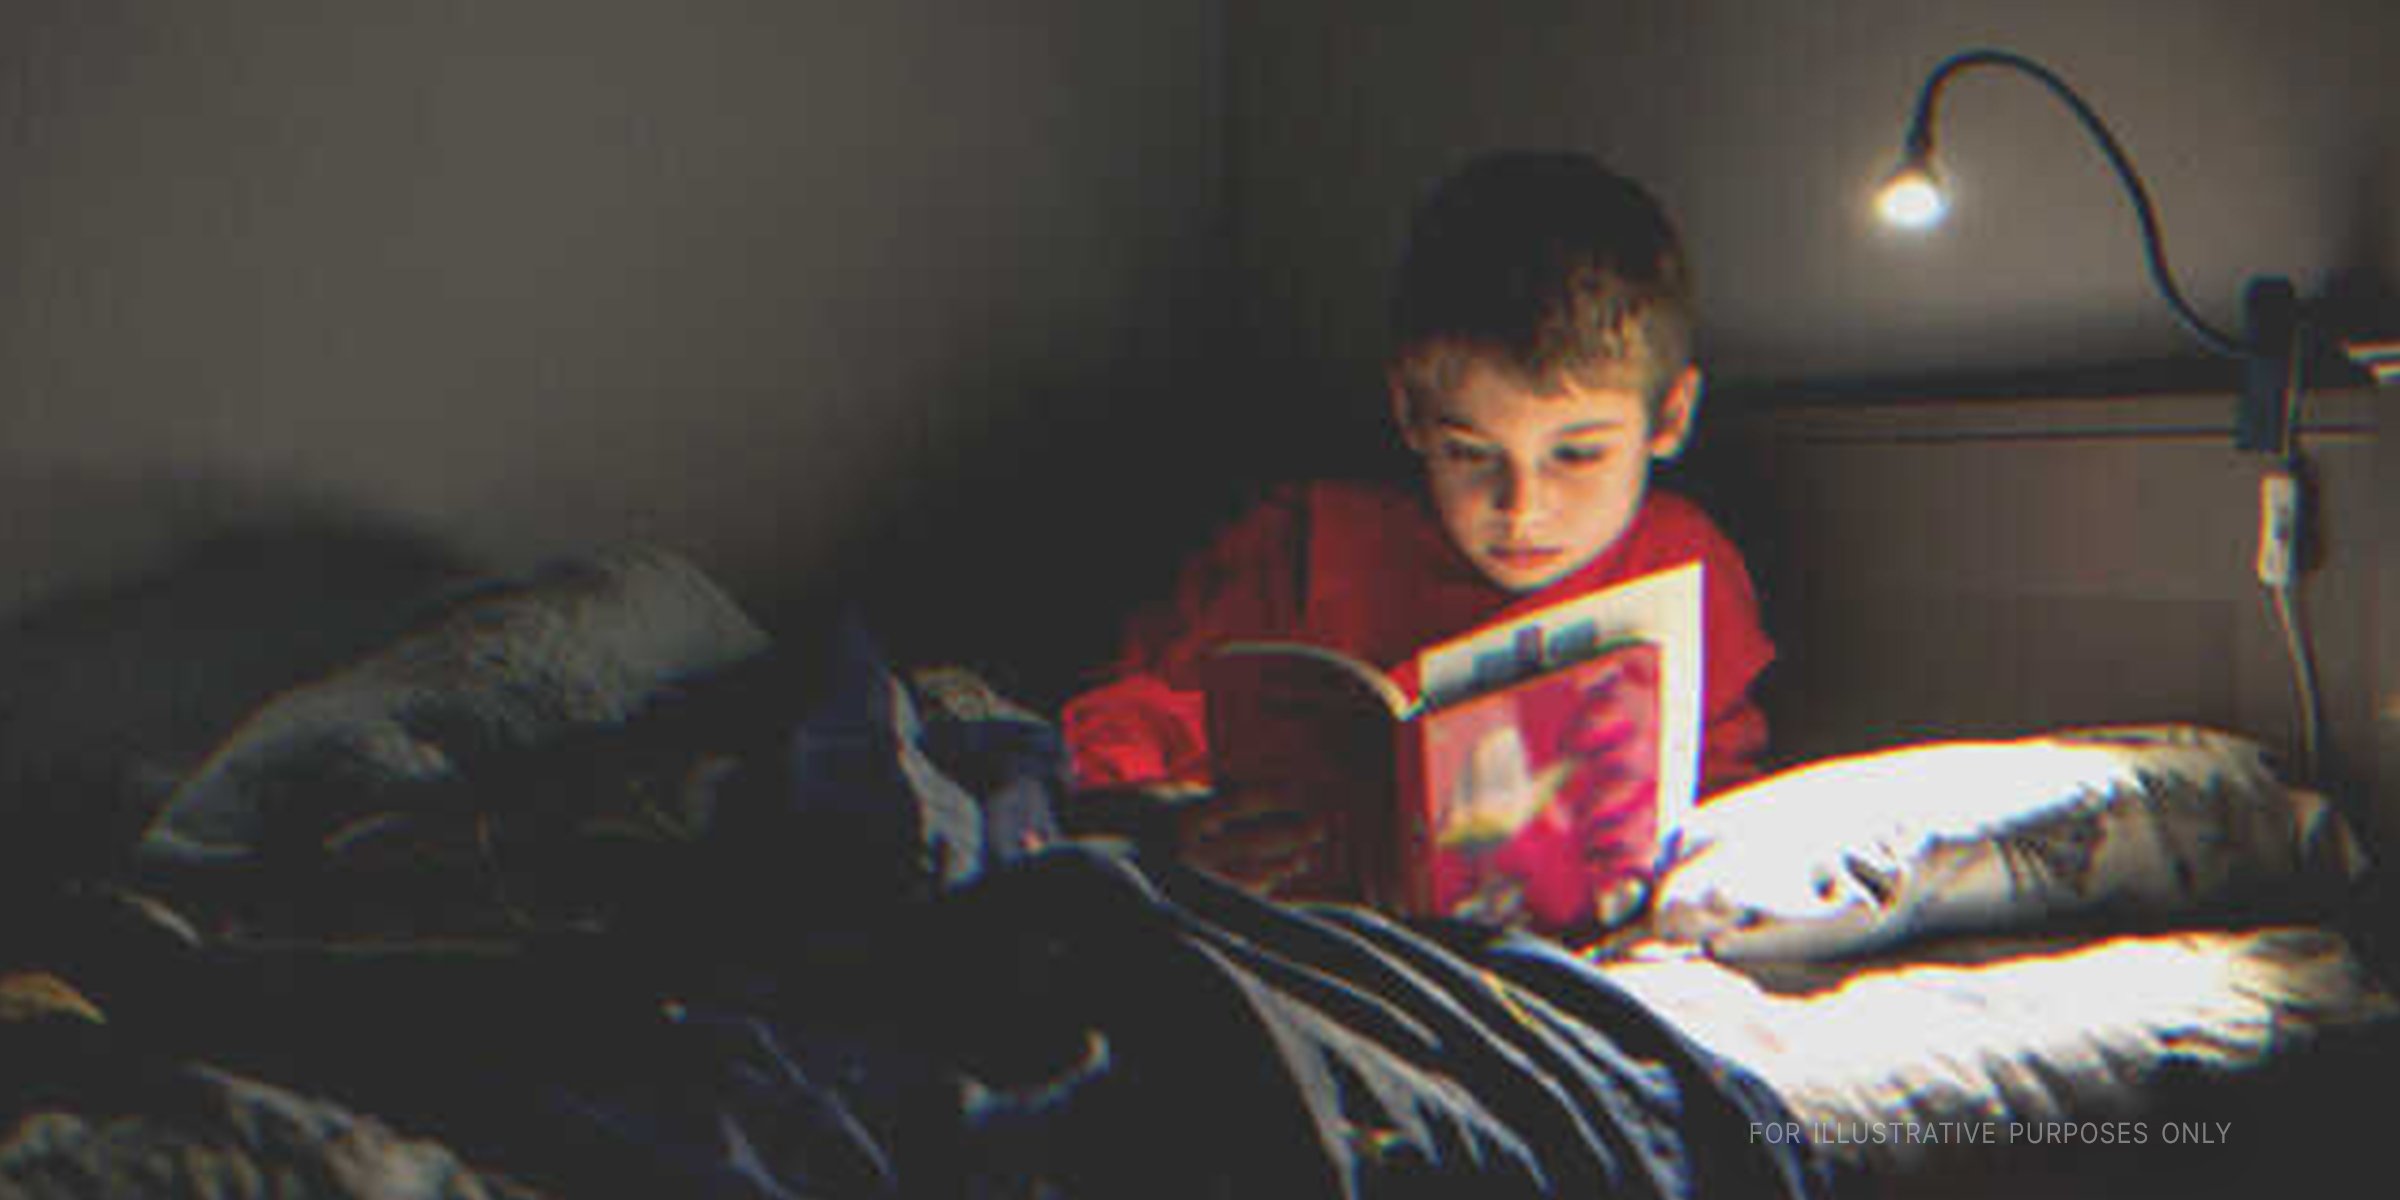 Boy reading in bed | Getty Images